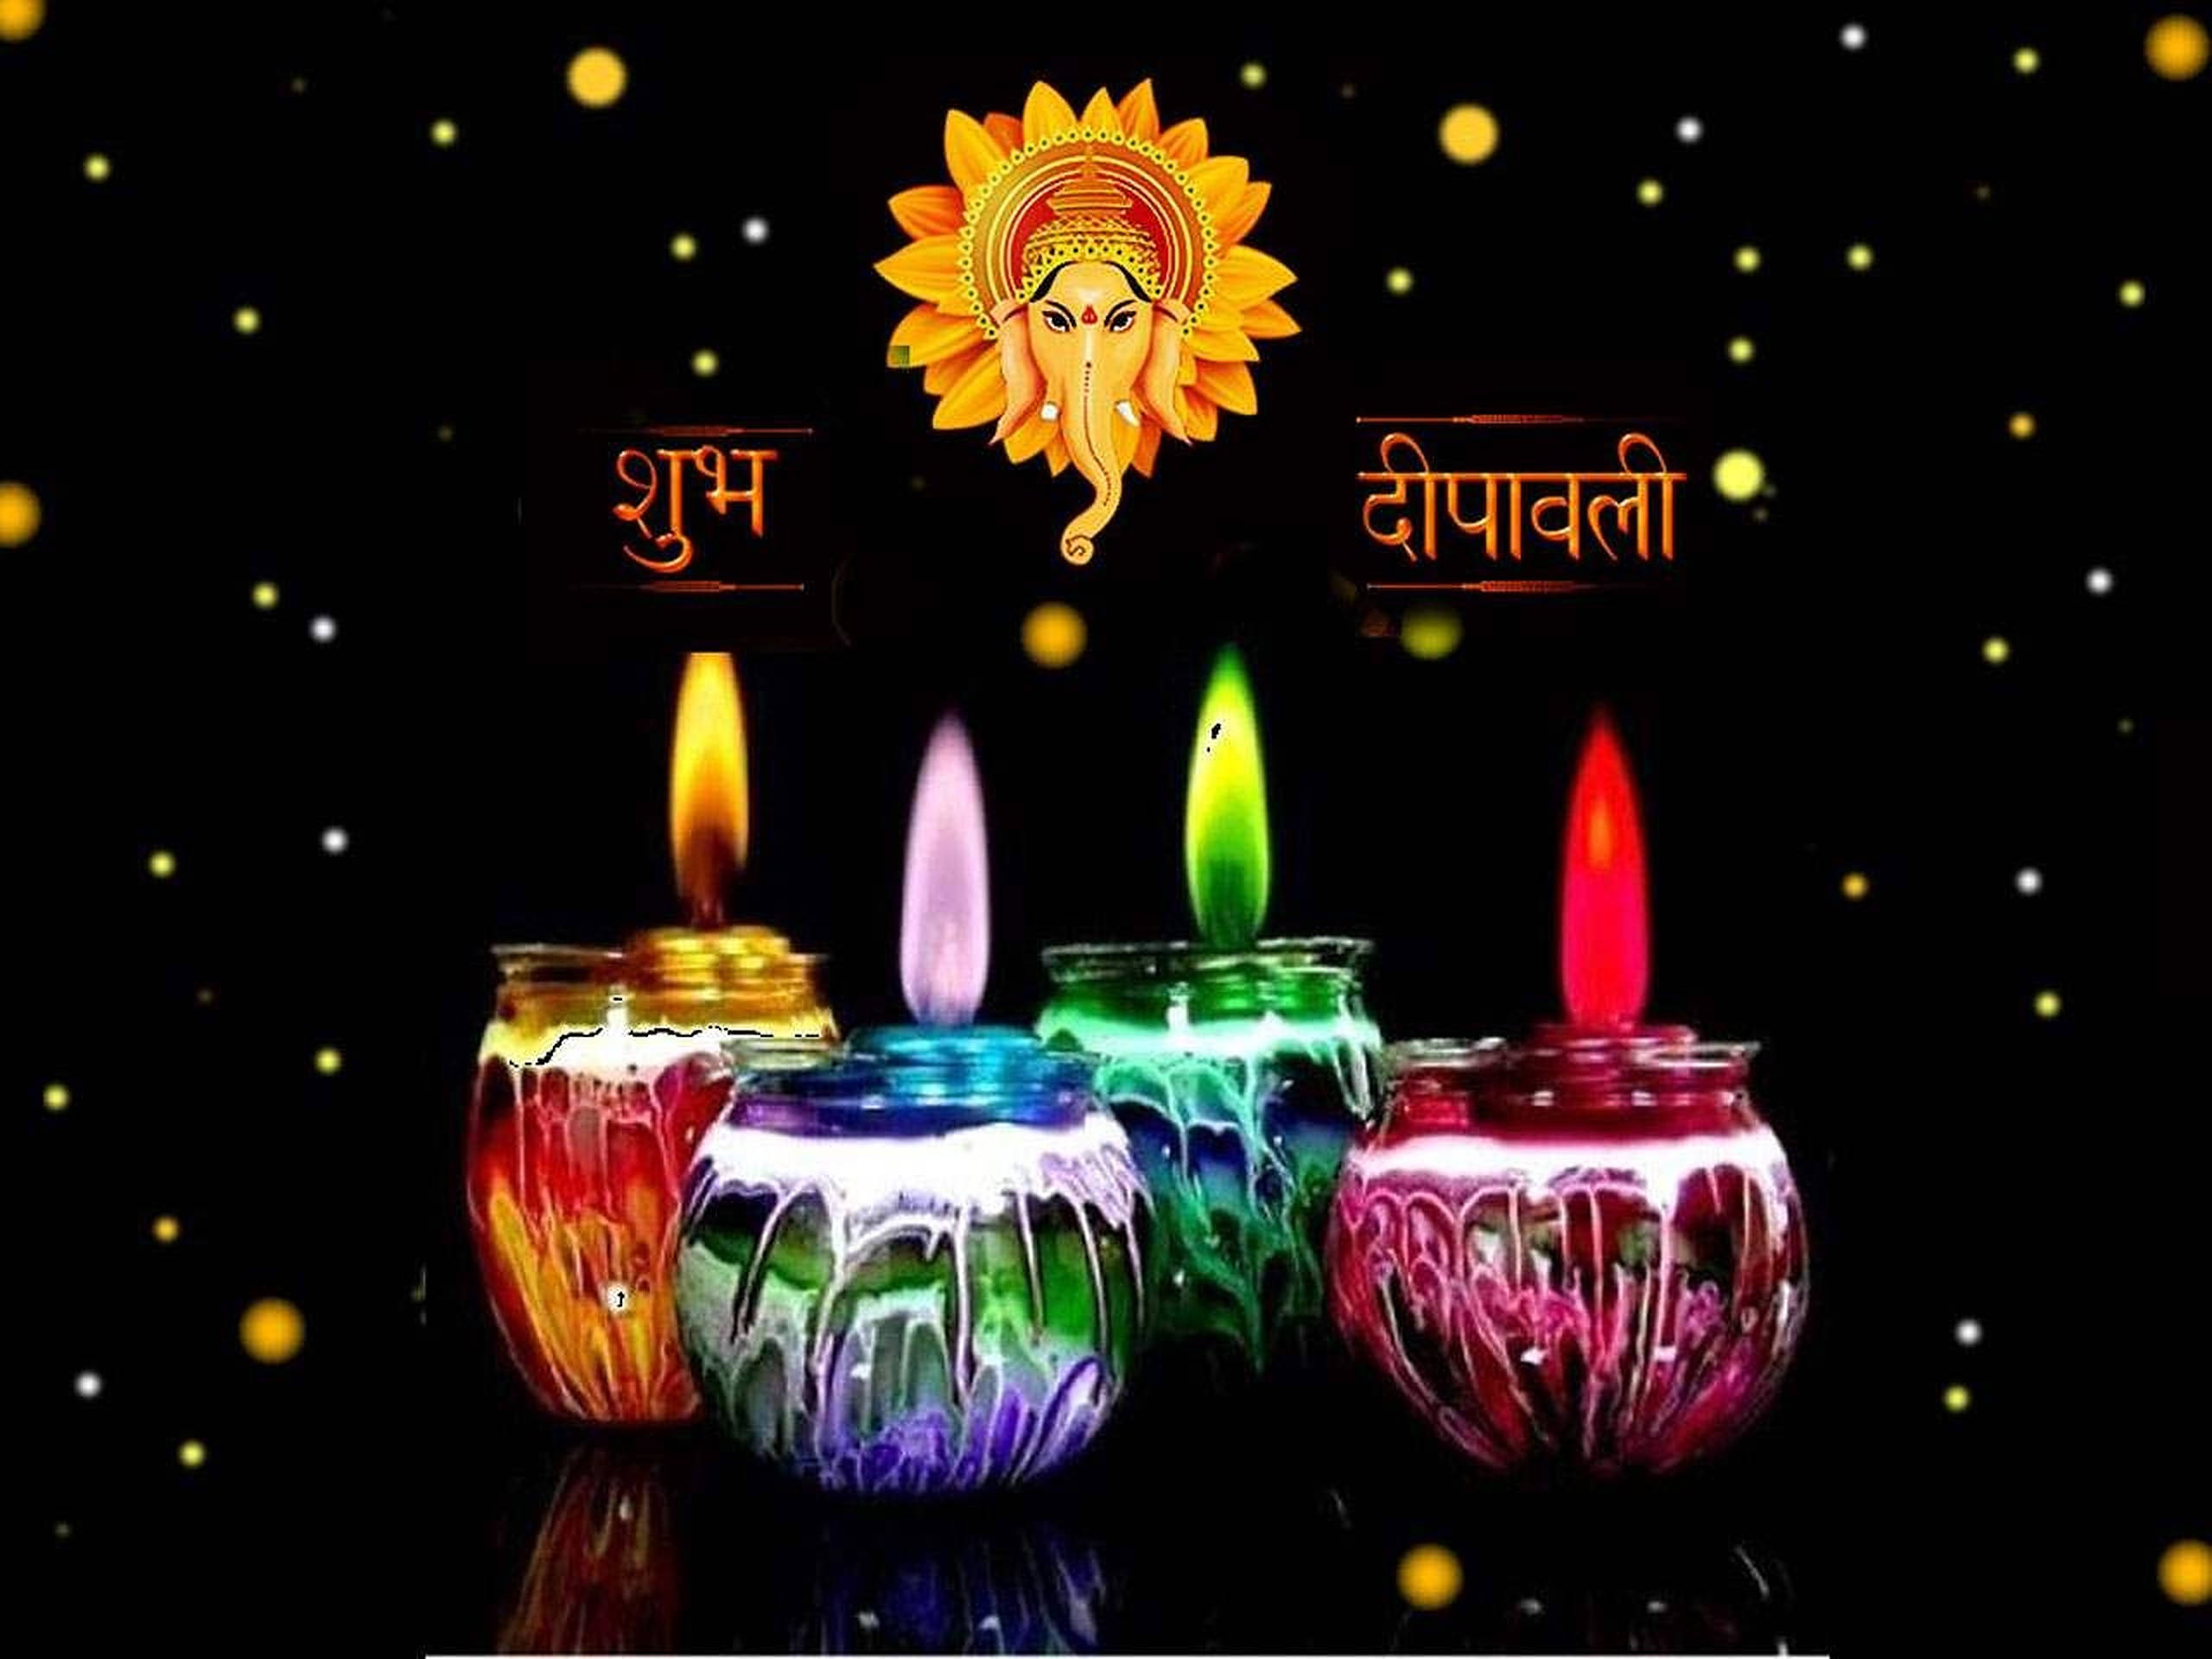 Wonderful Display Of Diwali Candles Of Various Colors Illuminated On A Dark Background With Luminous Light.